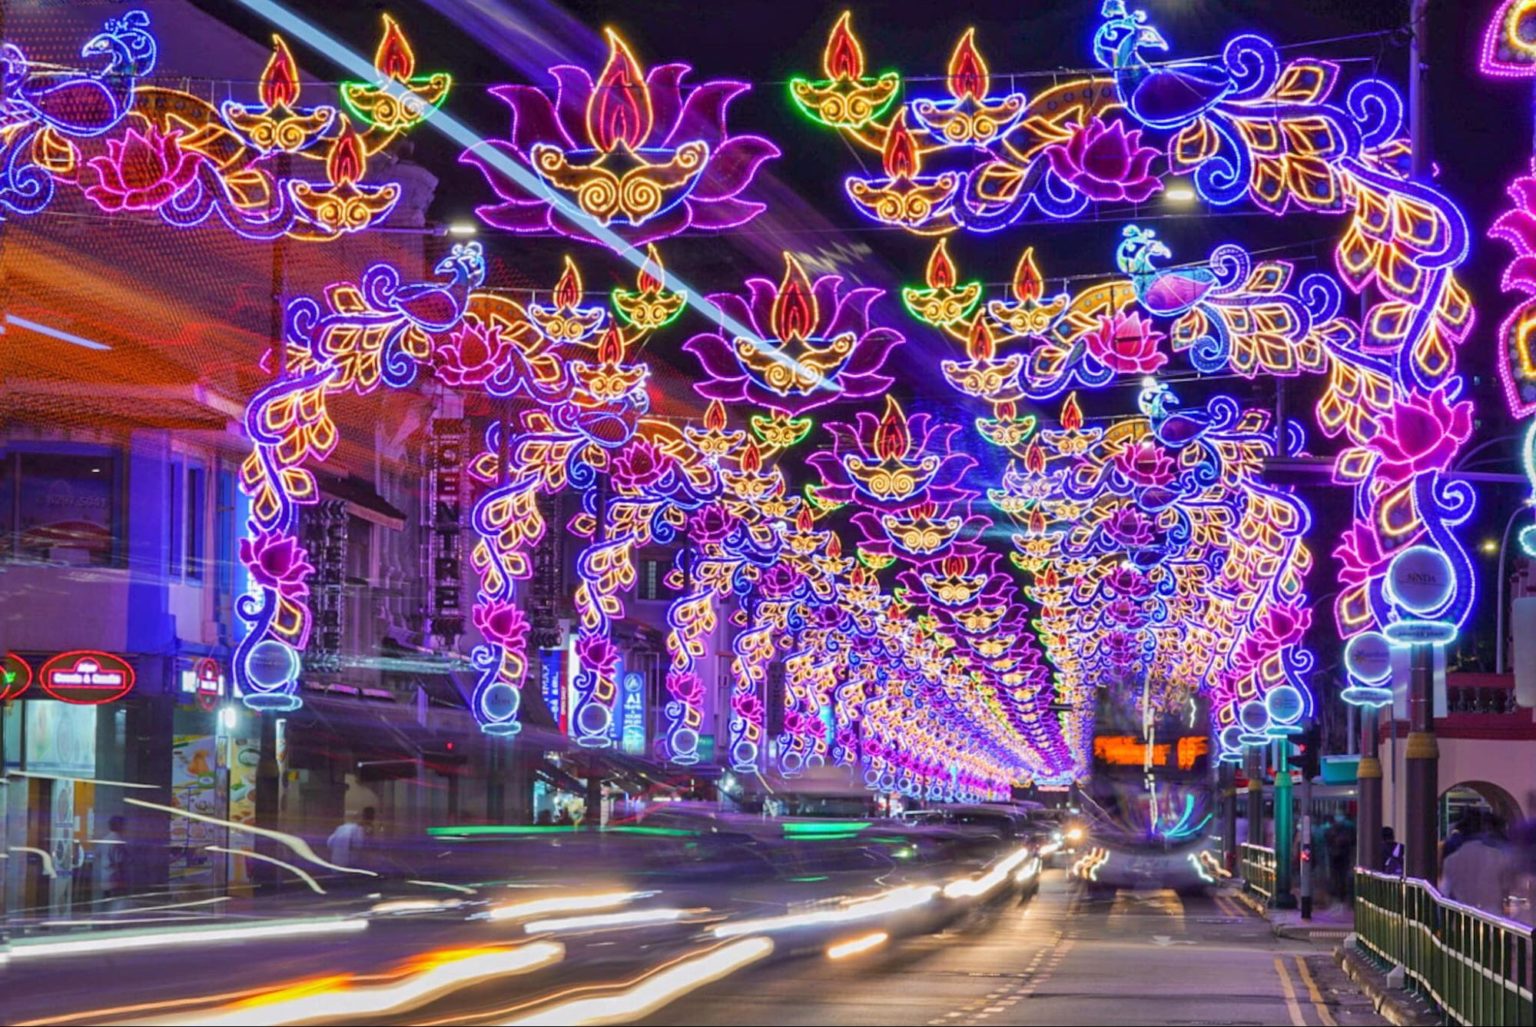 7 Things To Know About Deepavali & How The Festival Of Lights Is